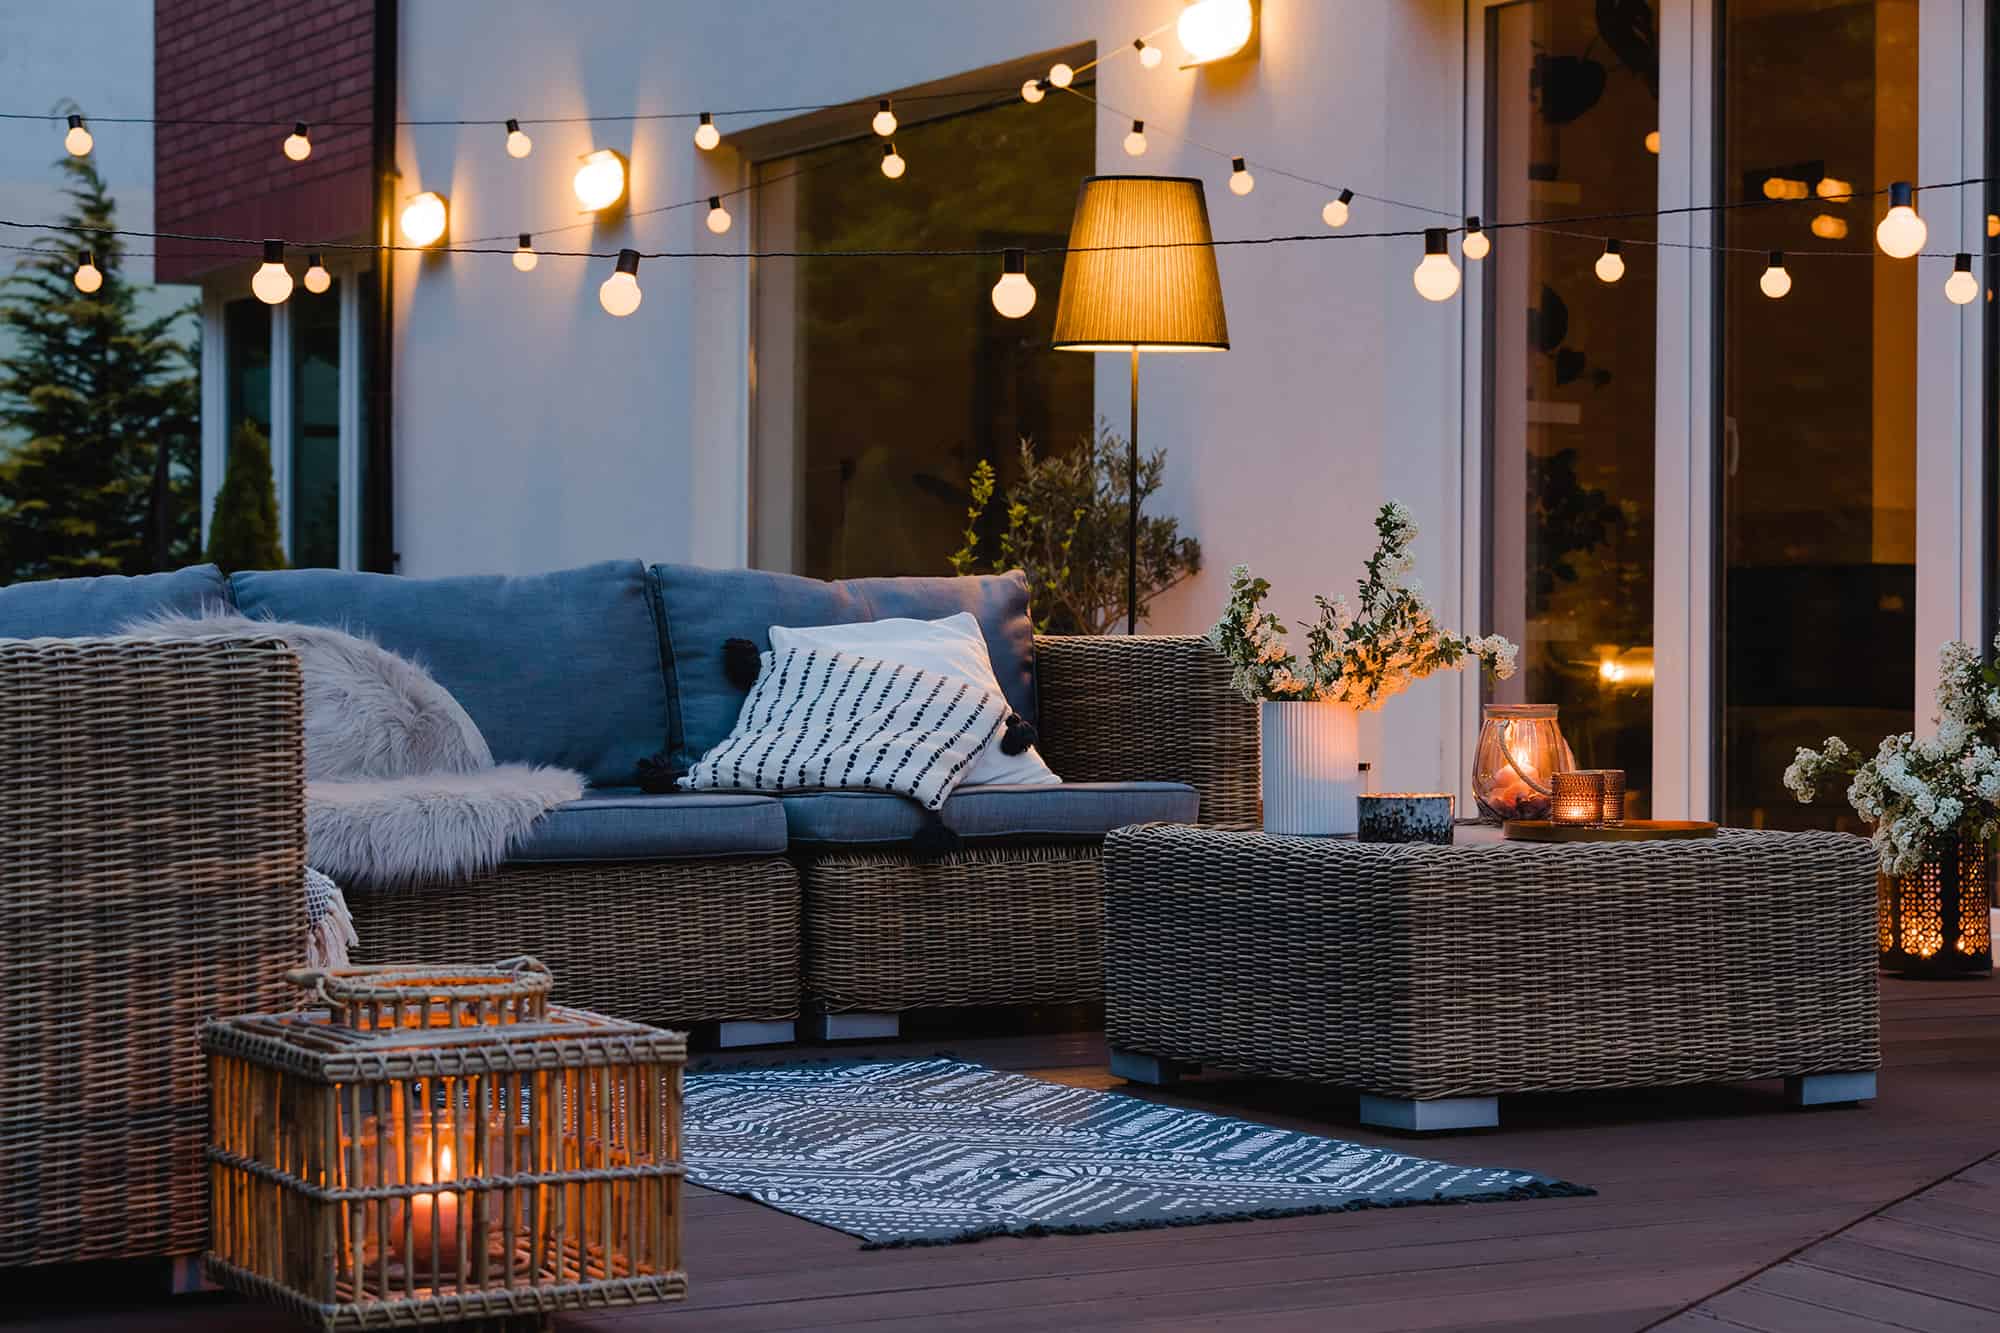 Outdoor seating area with string lights